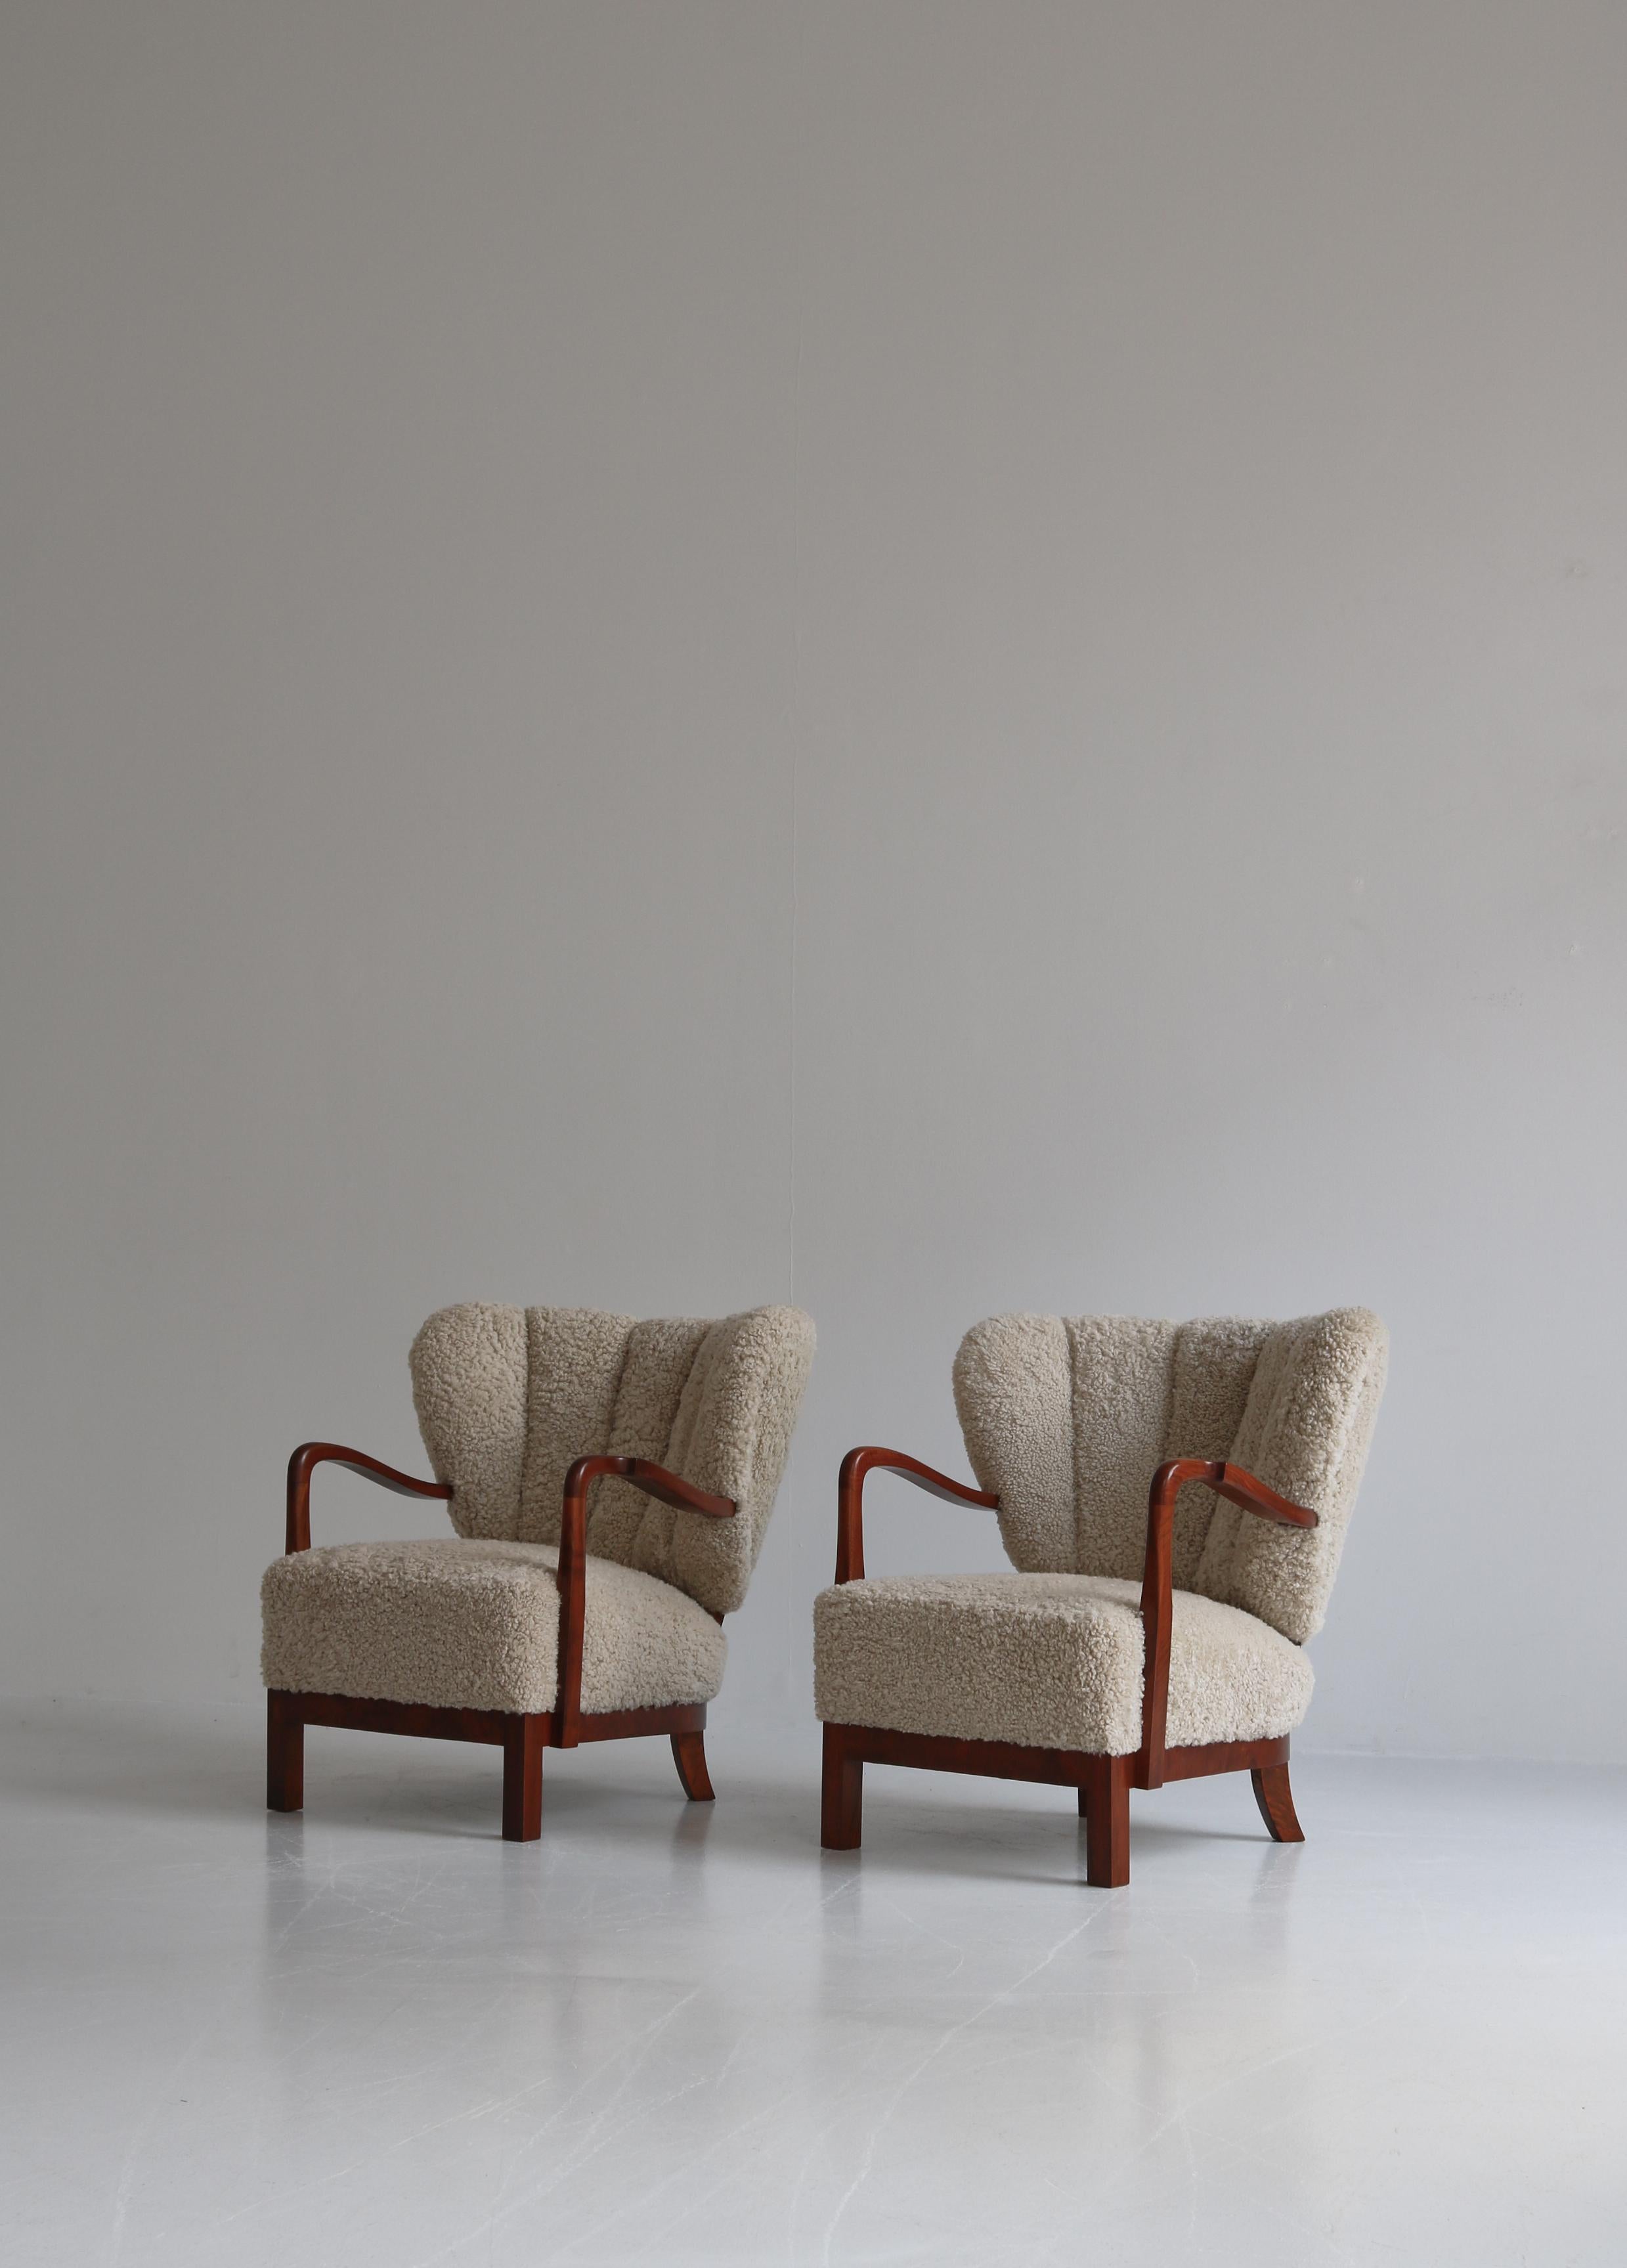 Mid-20th Century Viggo Boesen Lounge Chairs in Nutwood and Sheepskin, 1930s Danish Modern For Sale